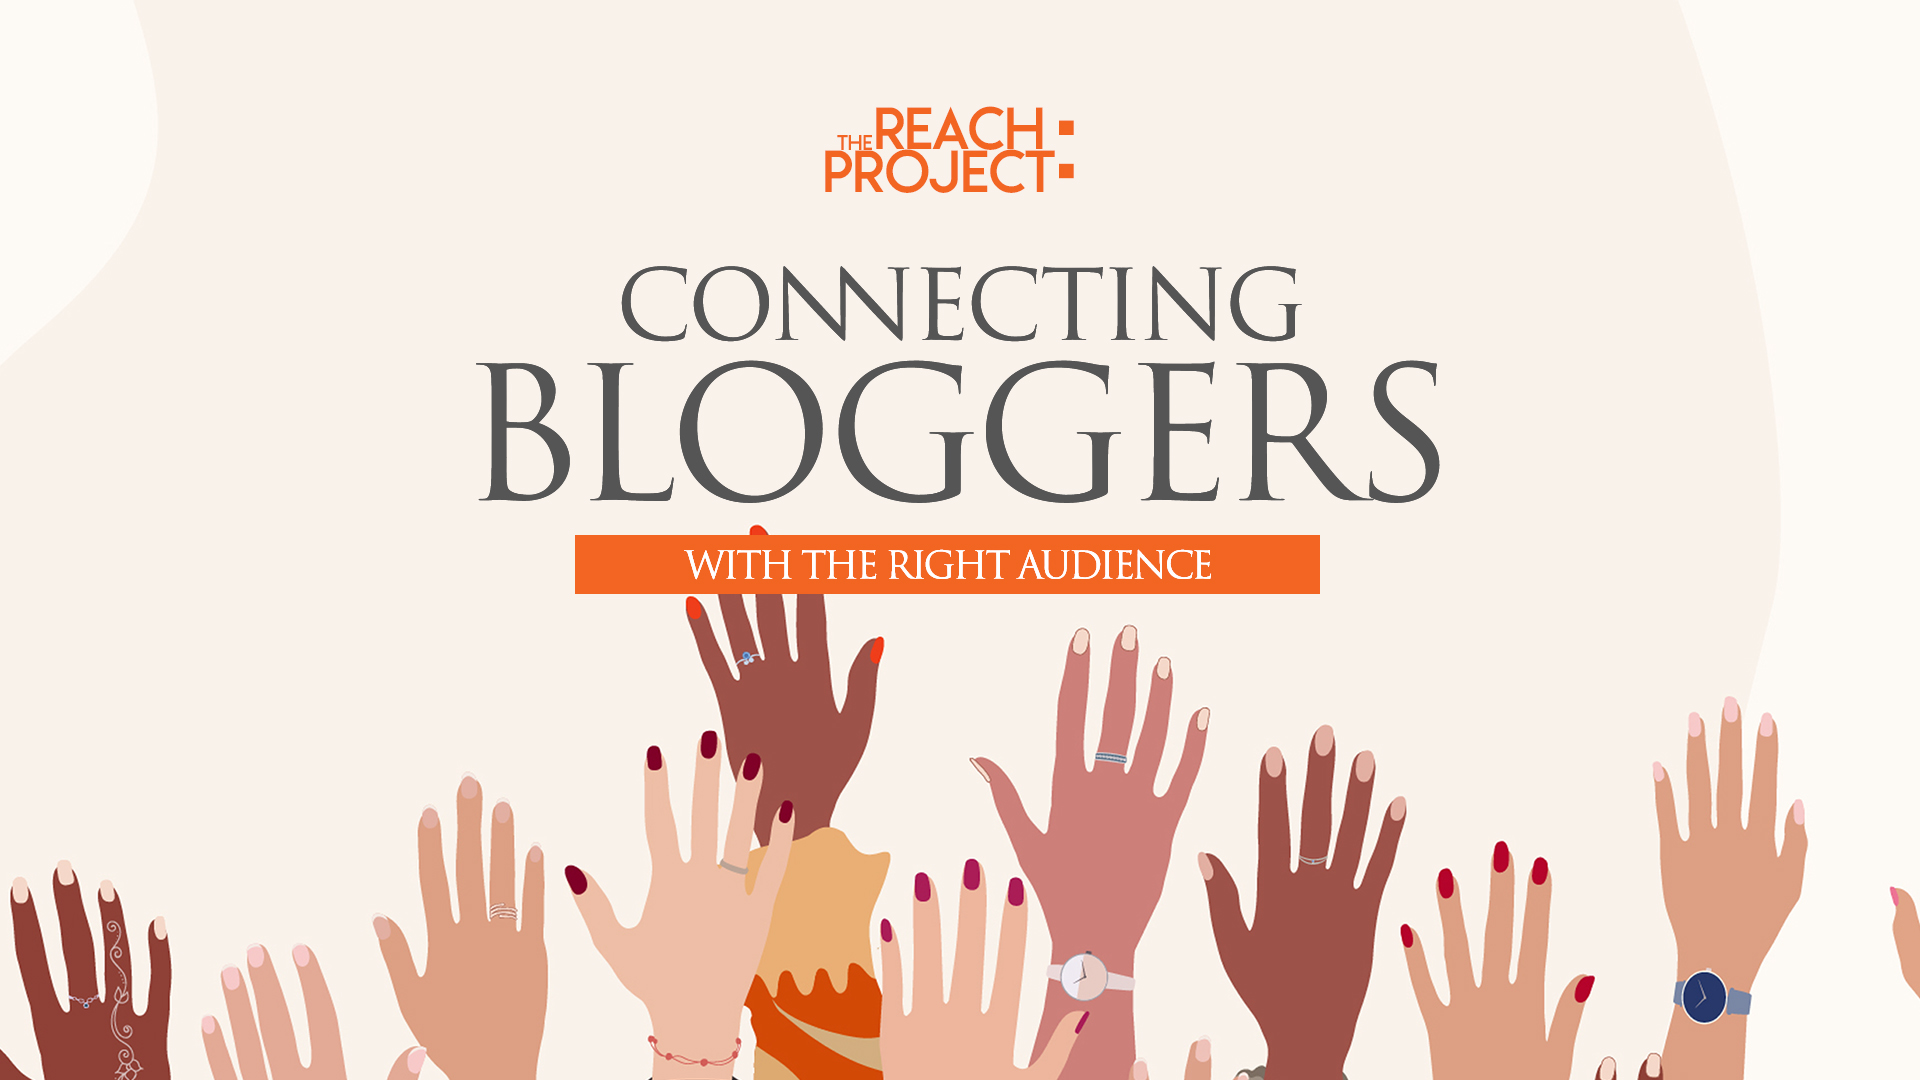 The Reach Project: Connecting Bloggers With The Right Audience